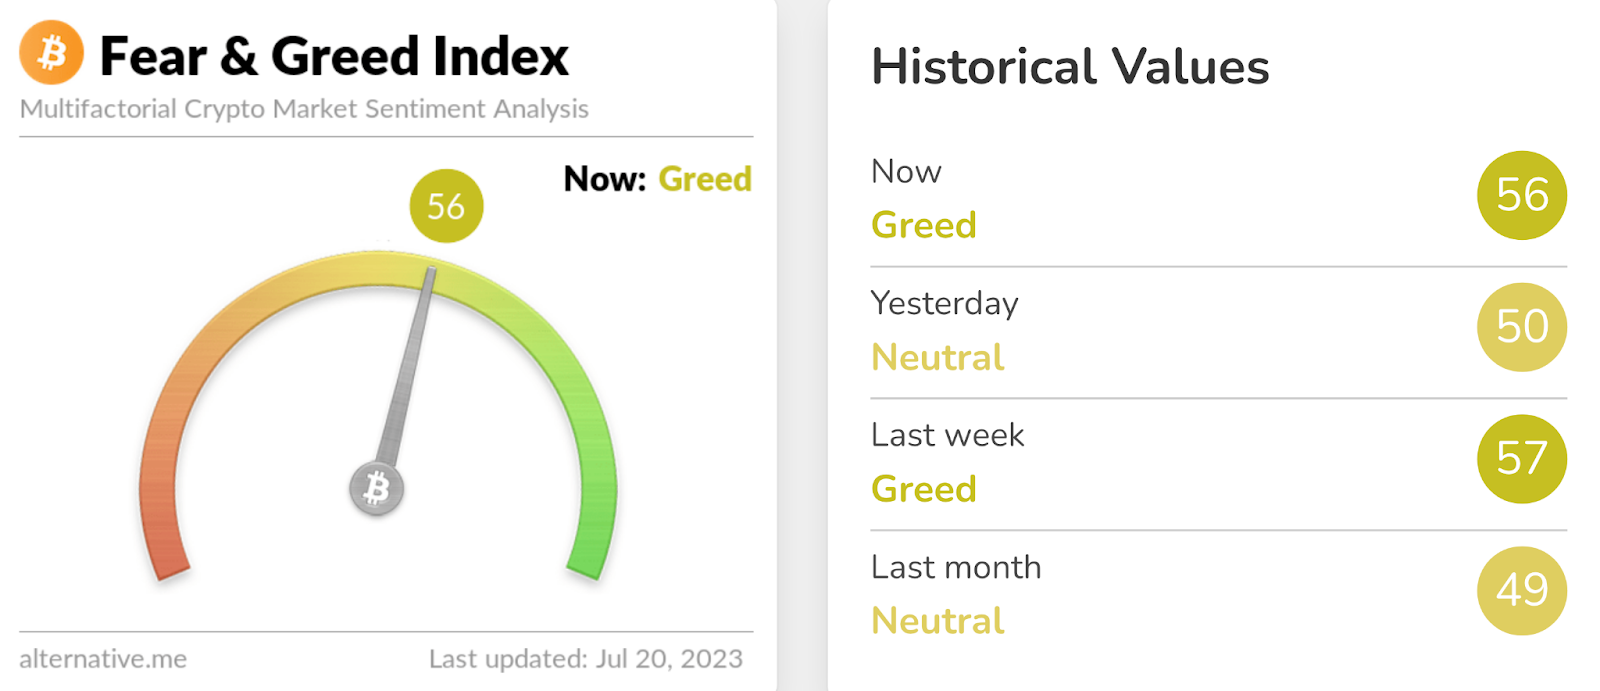 Fear and Greed Index | Source: Alternative.me